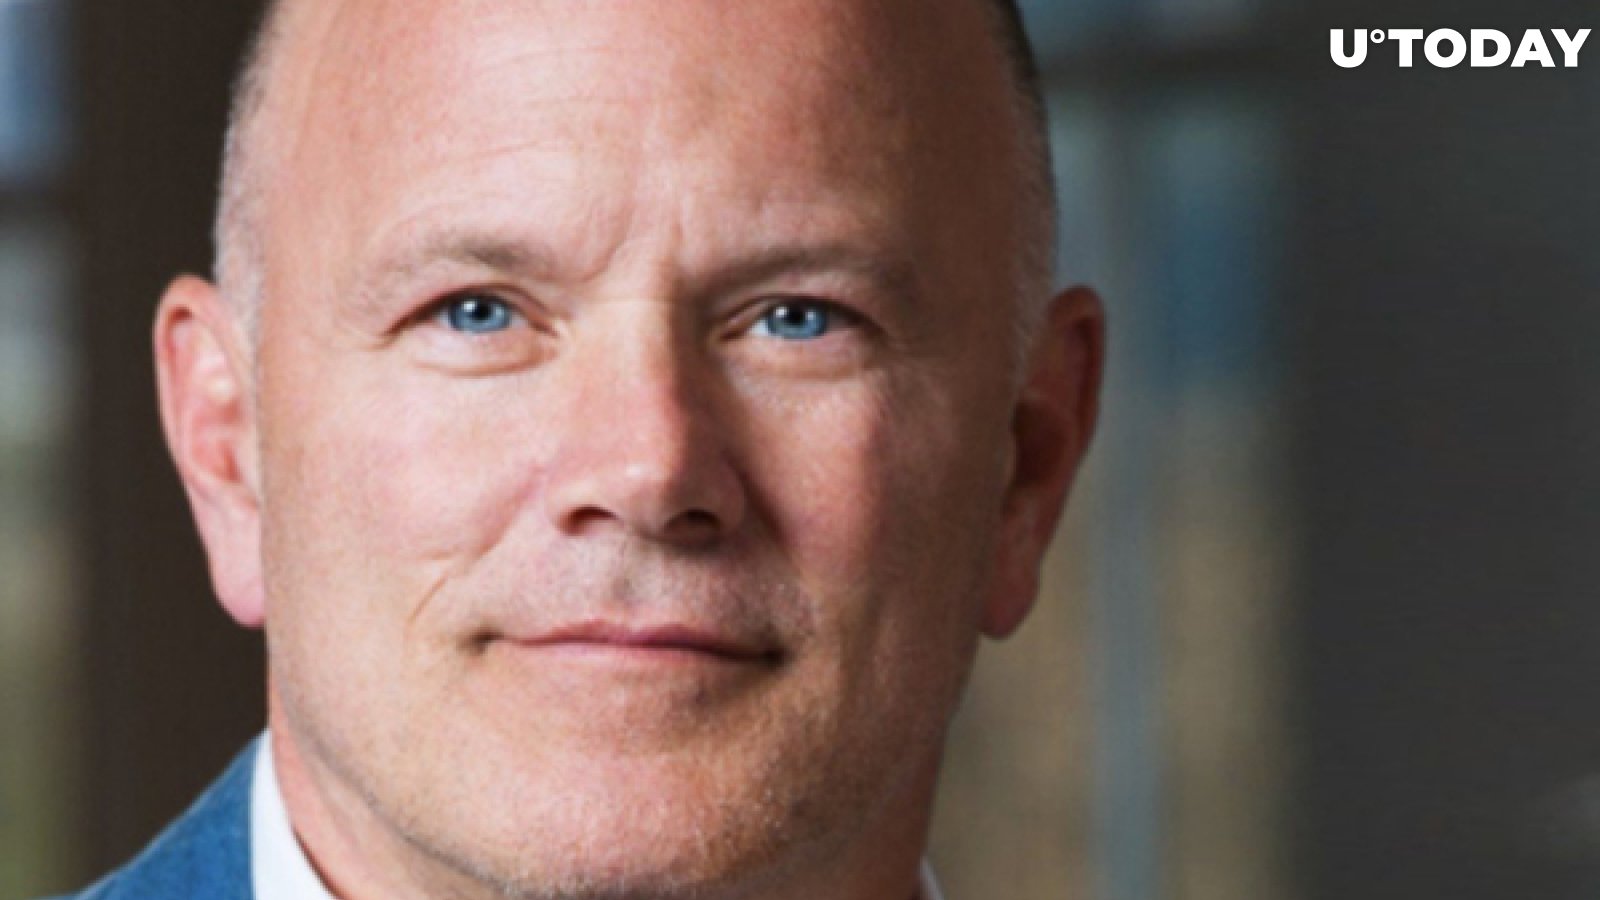 Mike Novogratz Shares His Take on Dogecoin $80 Billion Rally, Says Elon Musk Is Not the Only Trigger